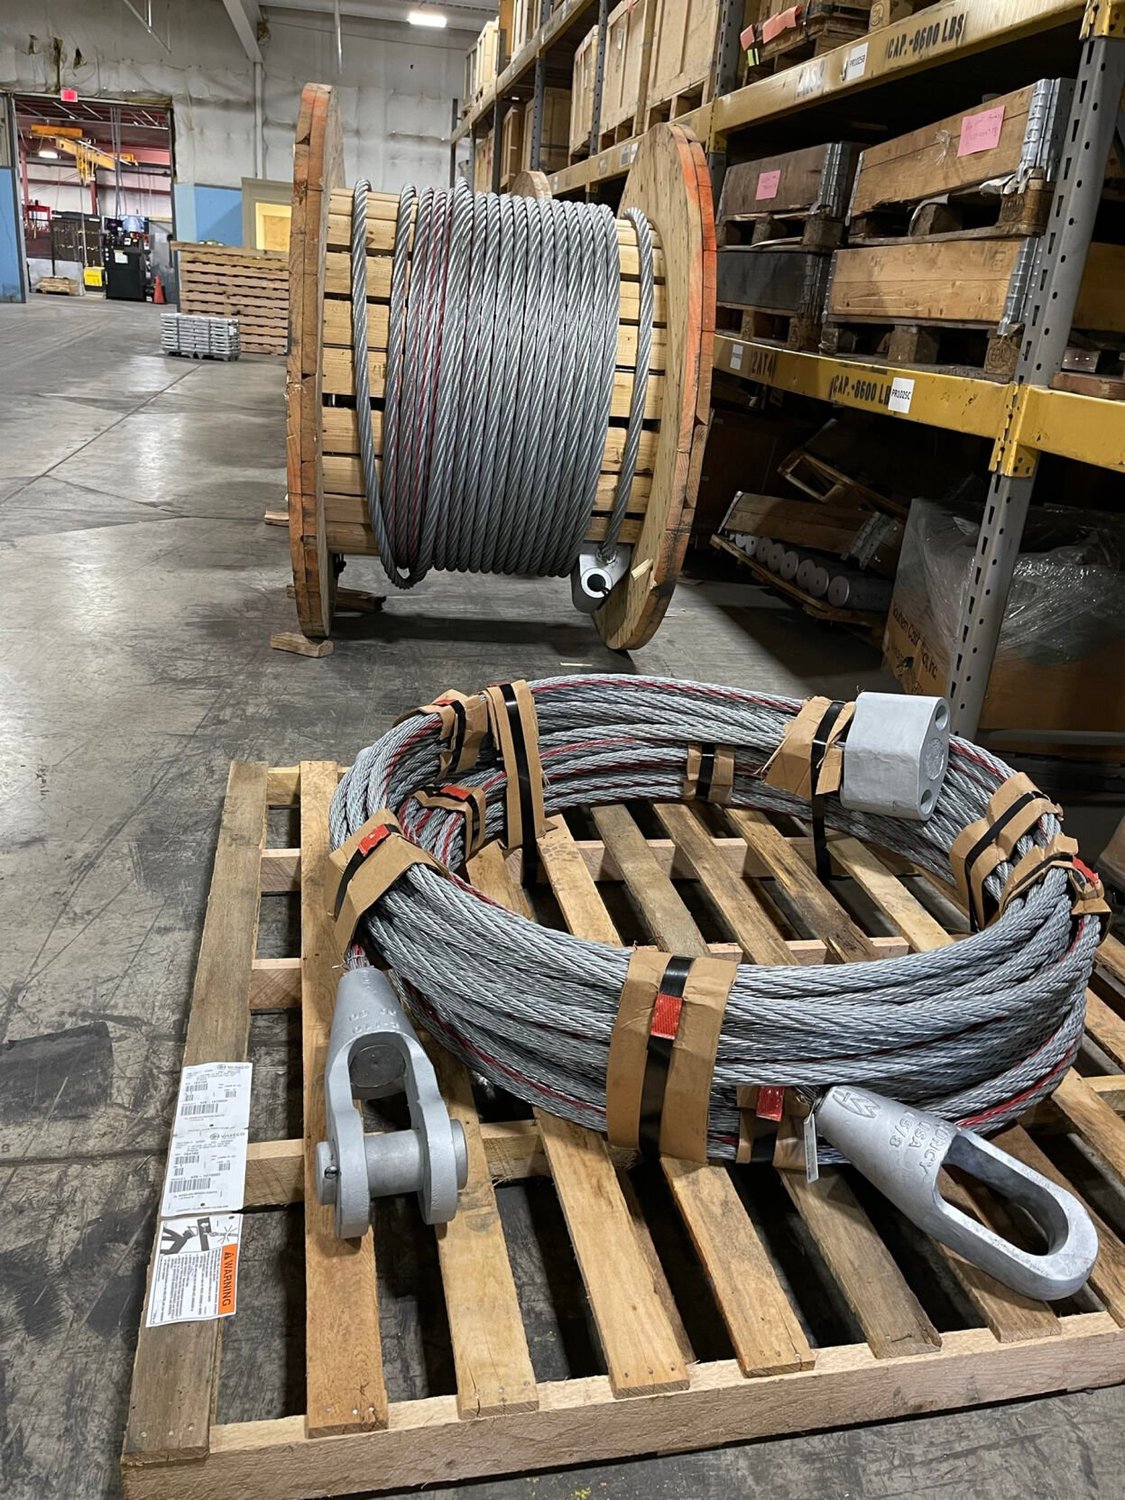 Finished wire rope assemblies packaged and ready to ship